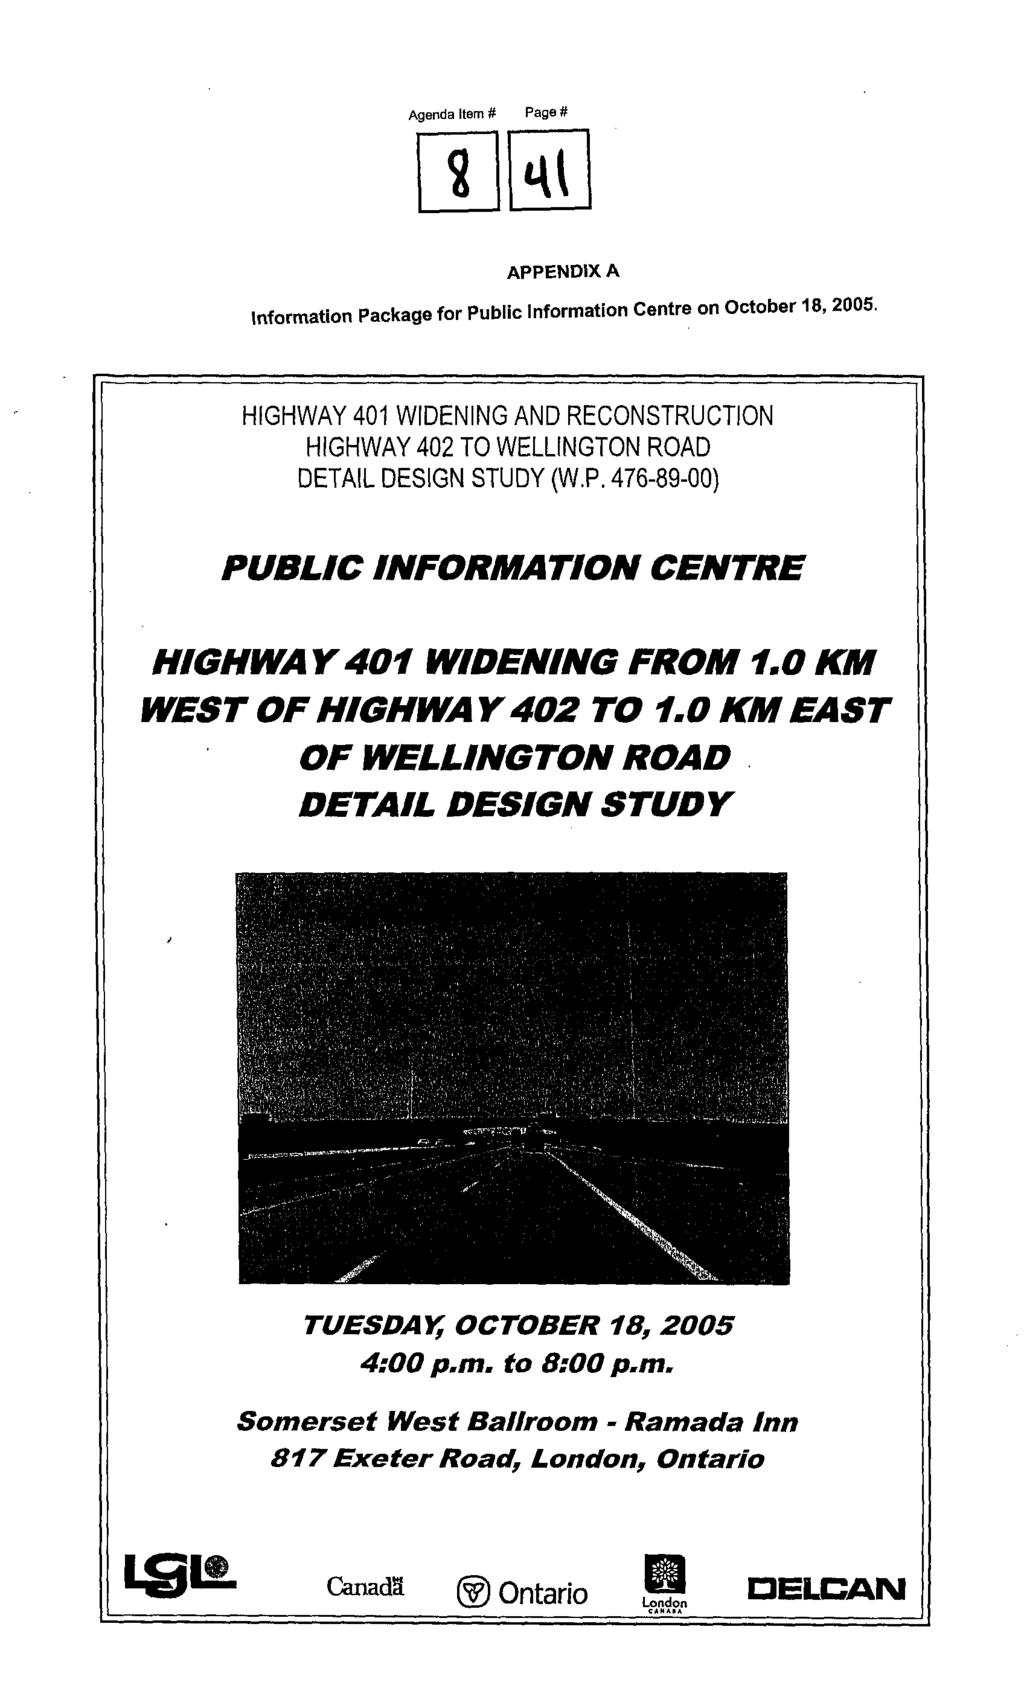 Agenda Item # Page # APPENDIX A Information Package for Public Information Centre on October 18,2005.